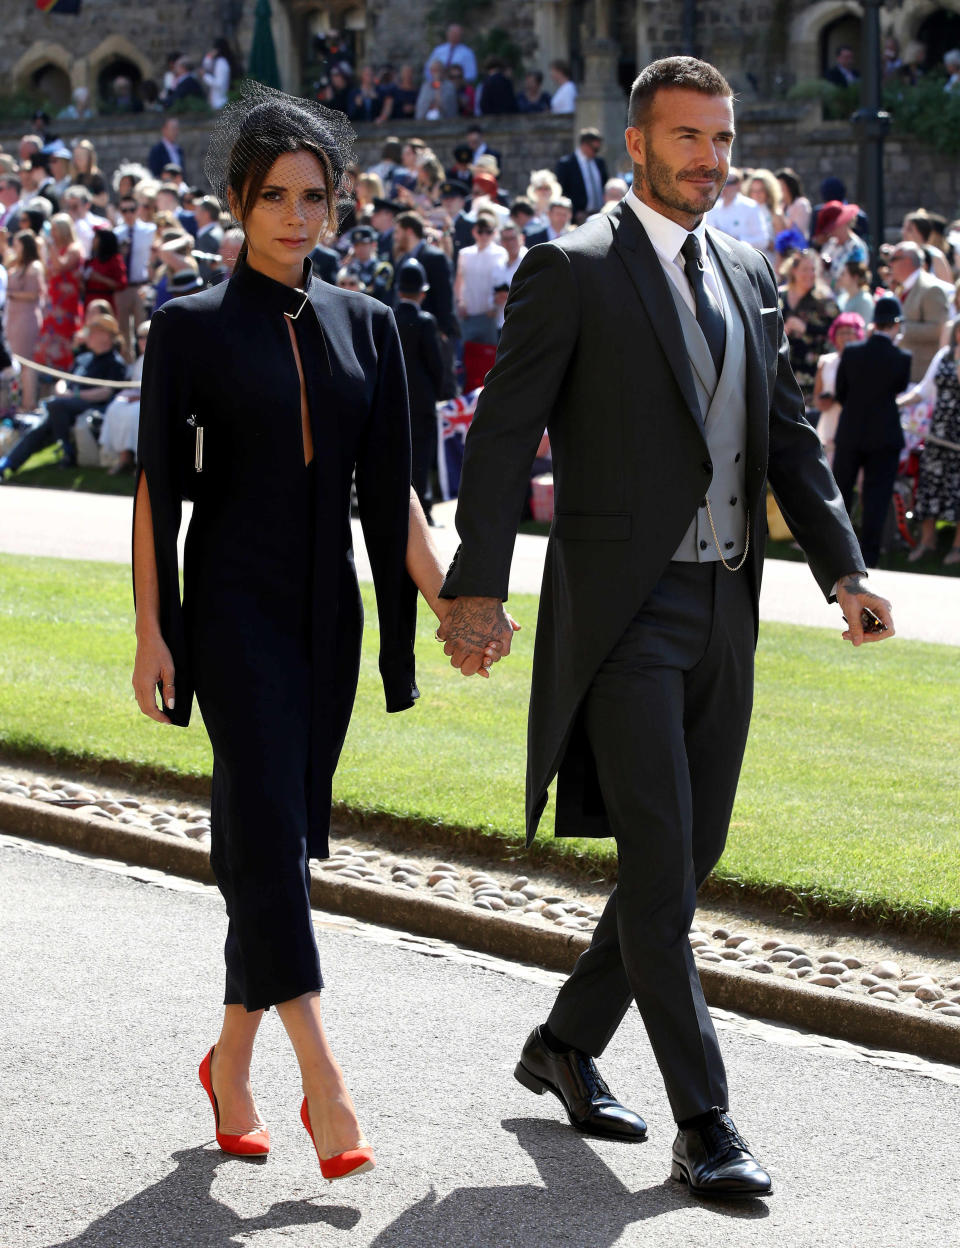 WINDSOR, UNITED KINGDOM - MAY 19:  Victoria Beckham and David Beckham arrives for the wedding ceremony of Britain's Prince Harry and US actress Meghan Markle at St George's Chapel, Windsor Castle on May 19, 2018 in Windsor, England. (Photo by Chris Radburn - WPA Pool/Getty Images)